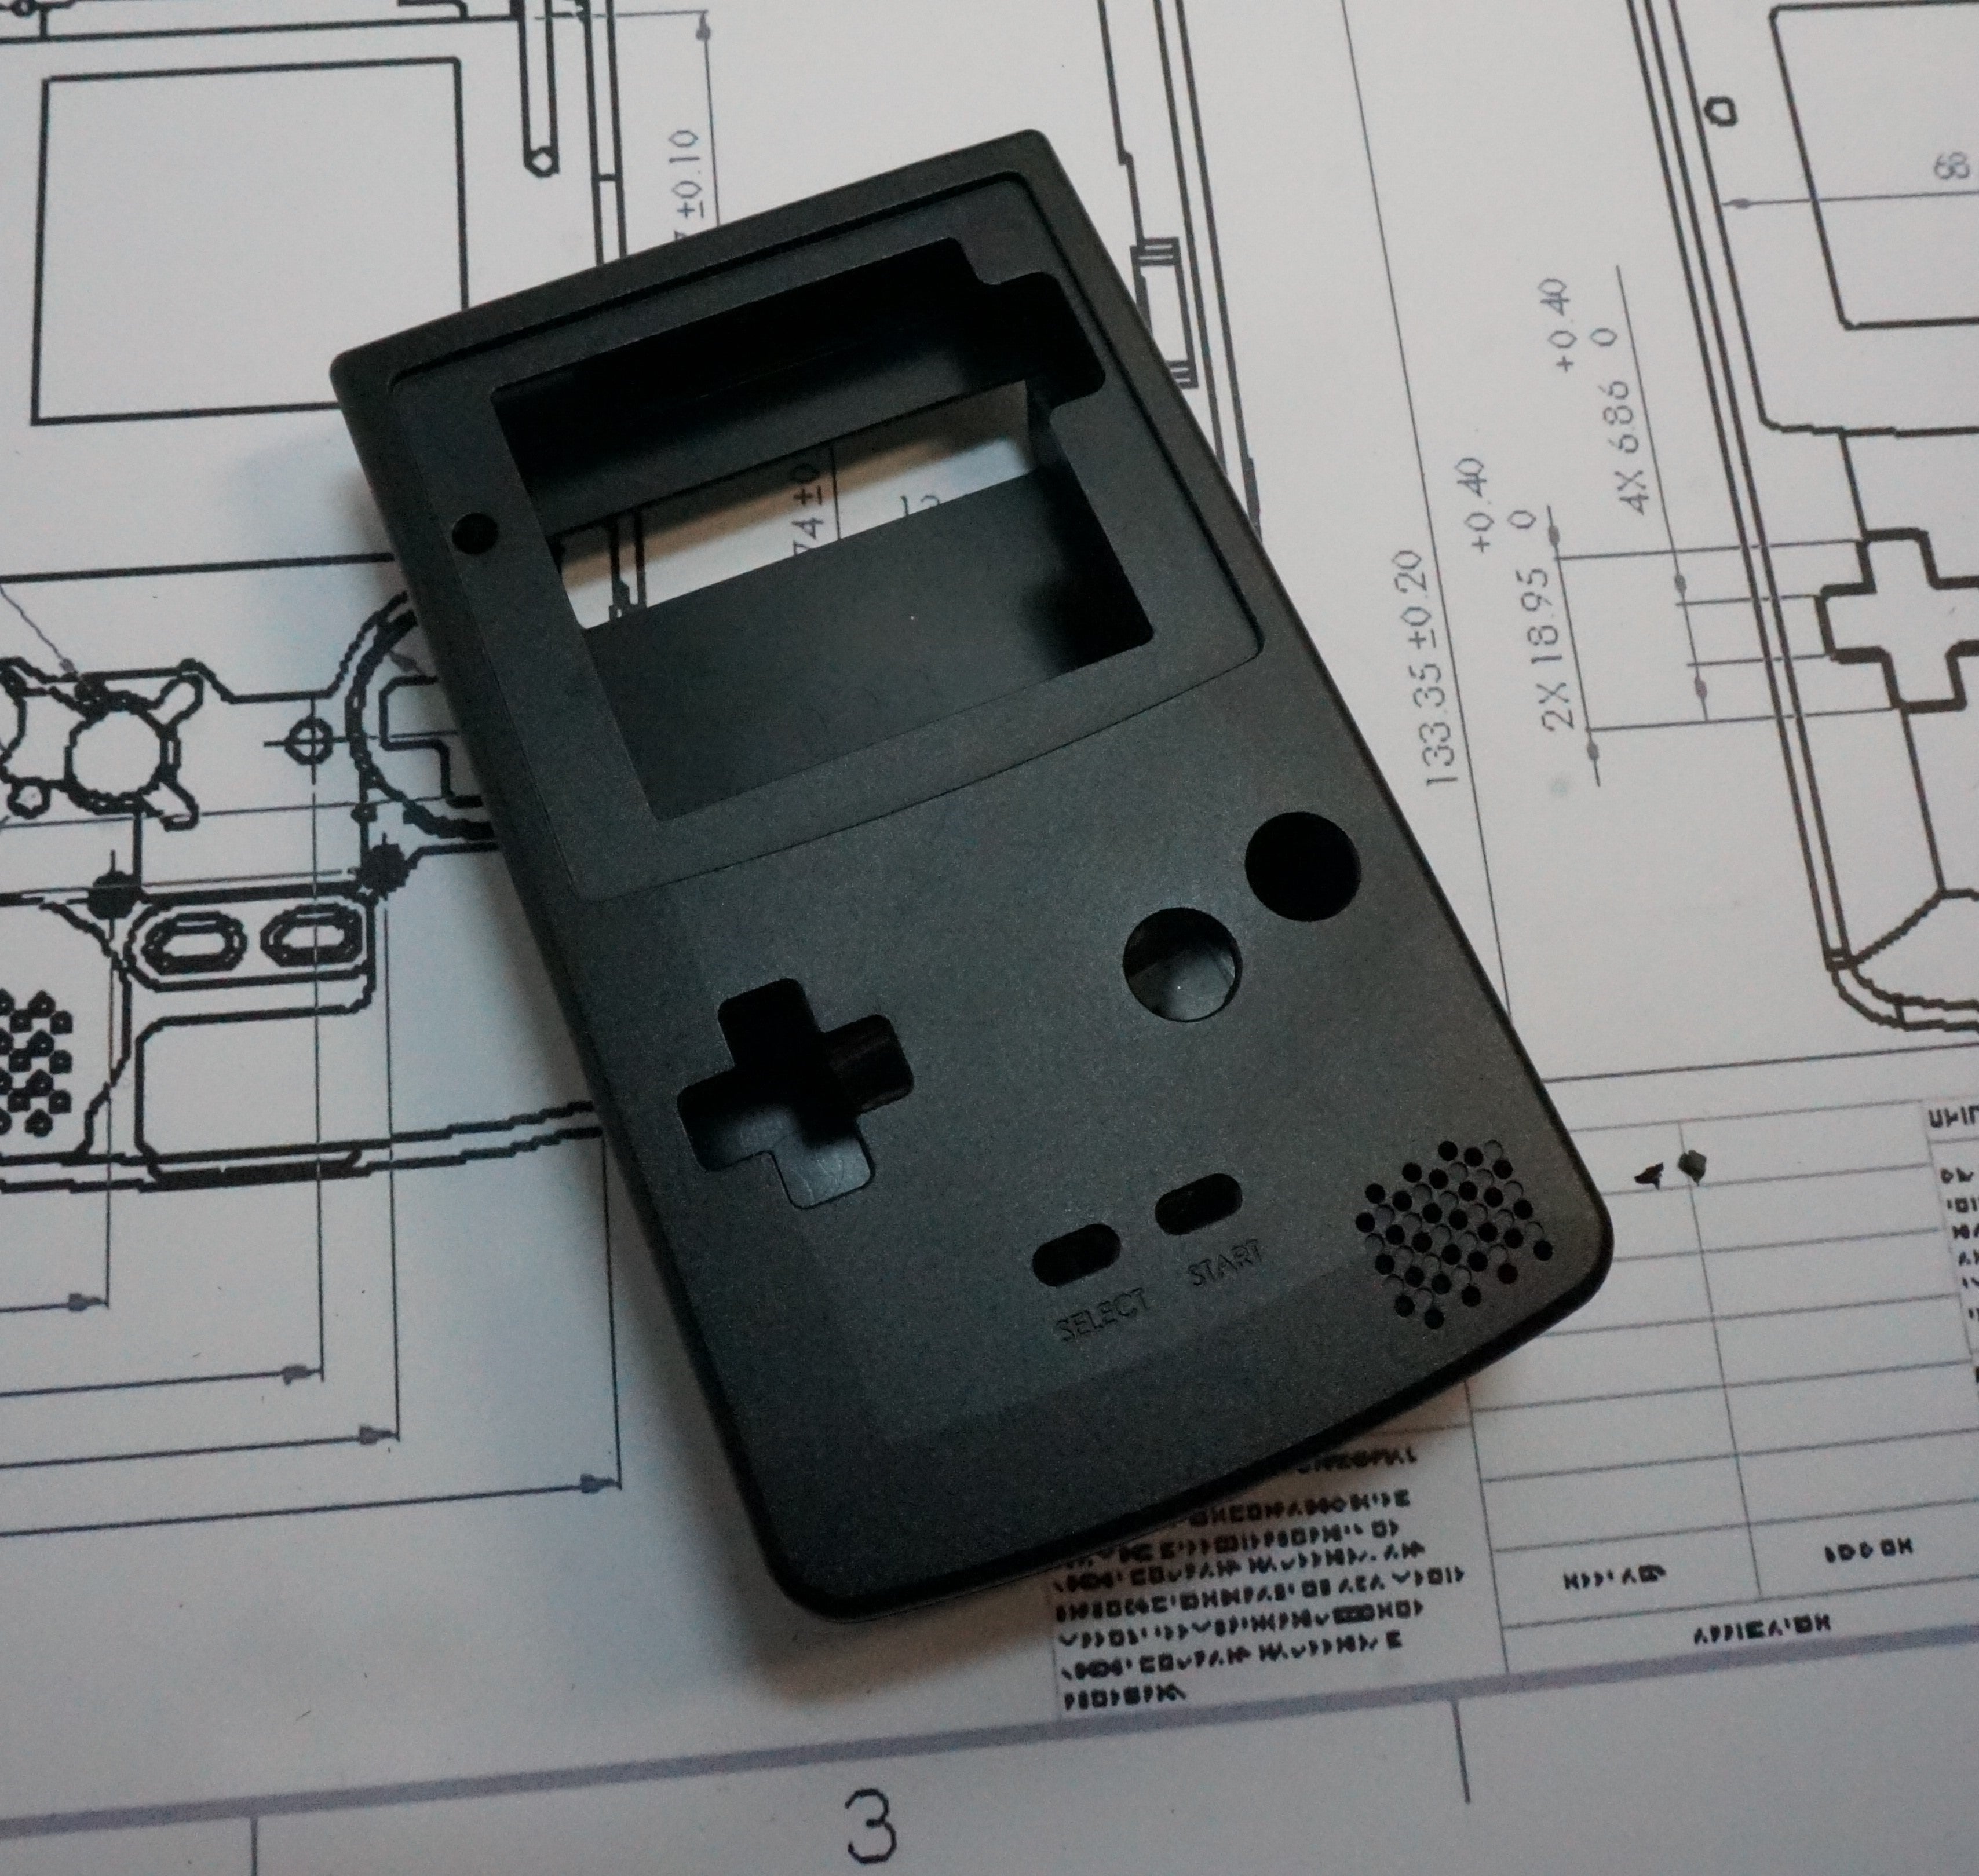 Game Boy Color in an Original Game Boy Shell